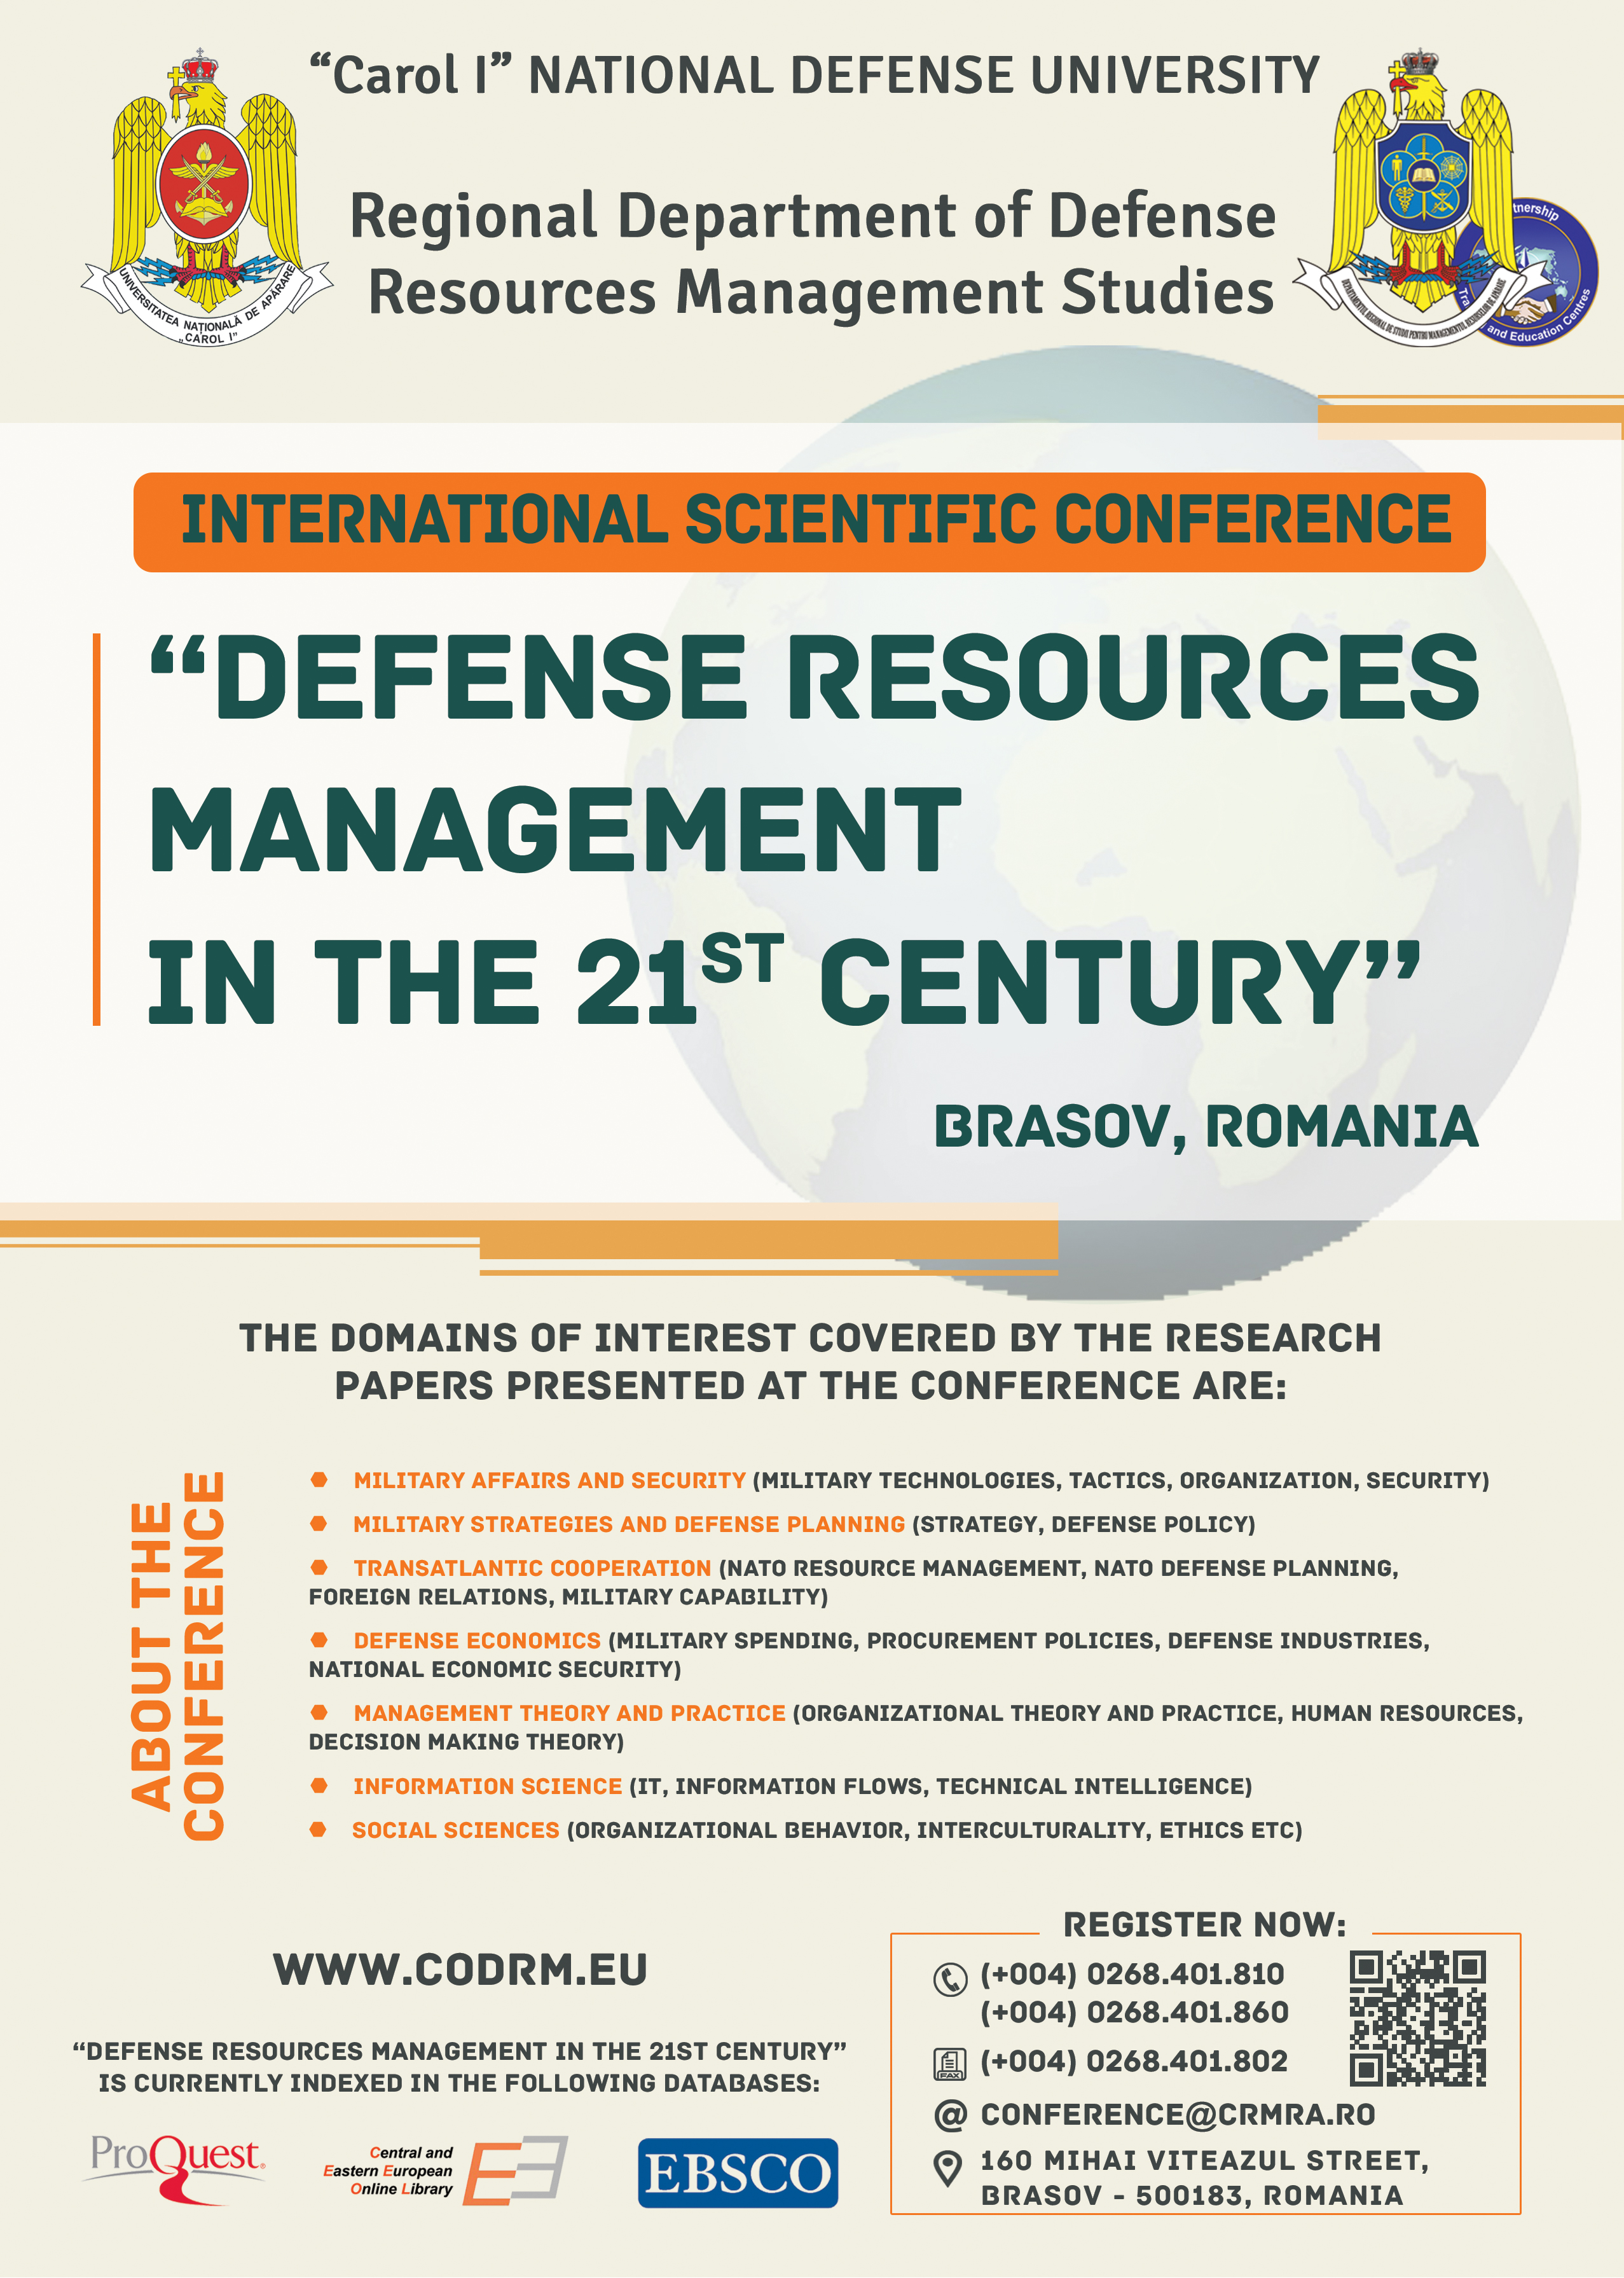 CURRENT RESEARCH AREAS IN DEFENSE SOFTWARE AND INFORMATION SYSTEMS PROJECT MANAGEMENT Cover Image